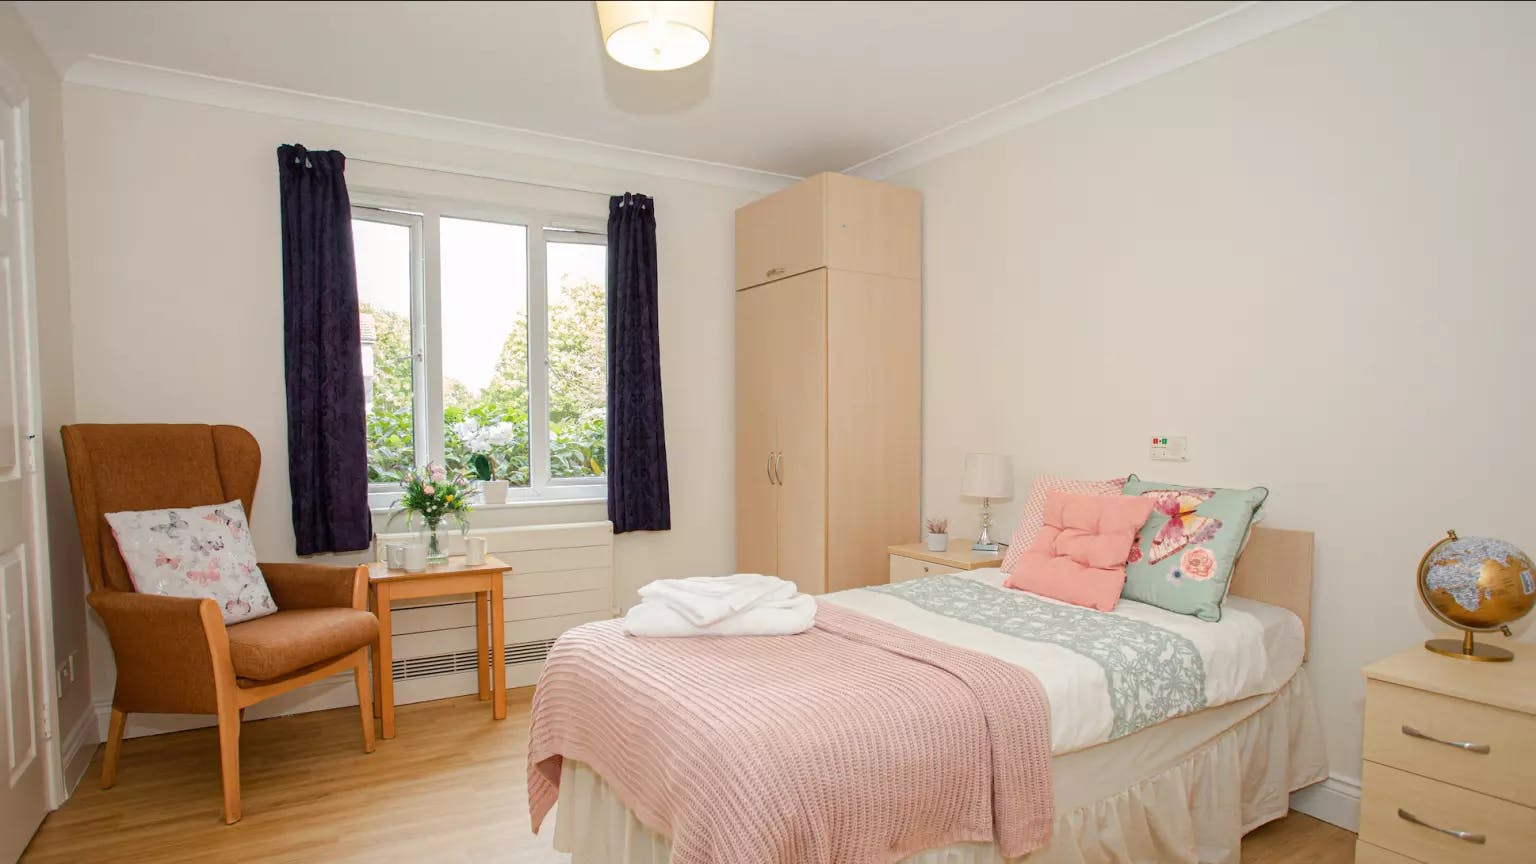 Bedroom of Pinewood Lodge care home in Watford, Hertfordshire